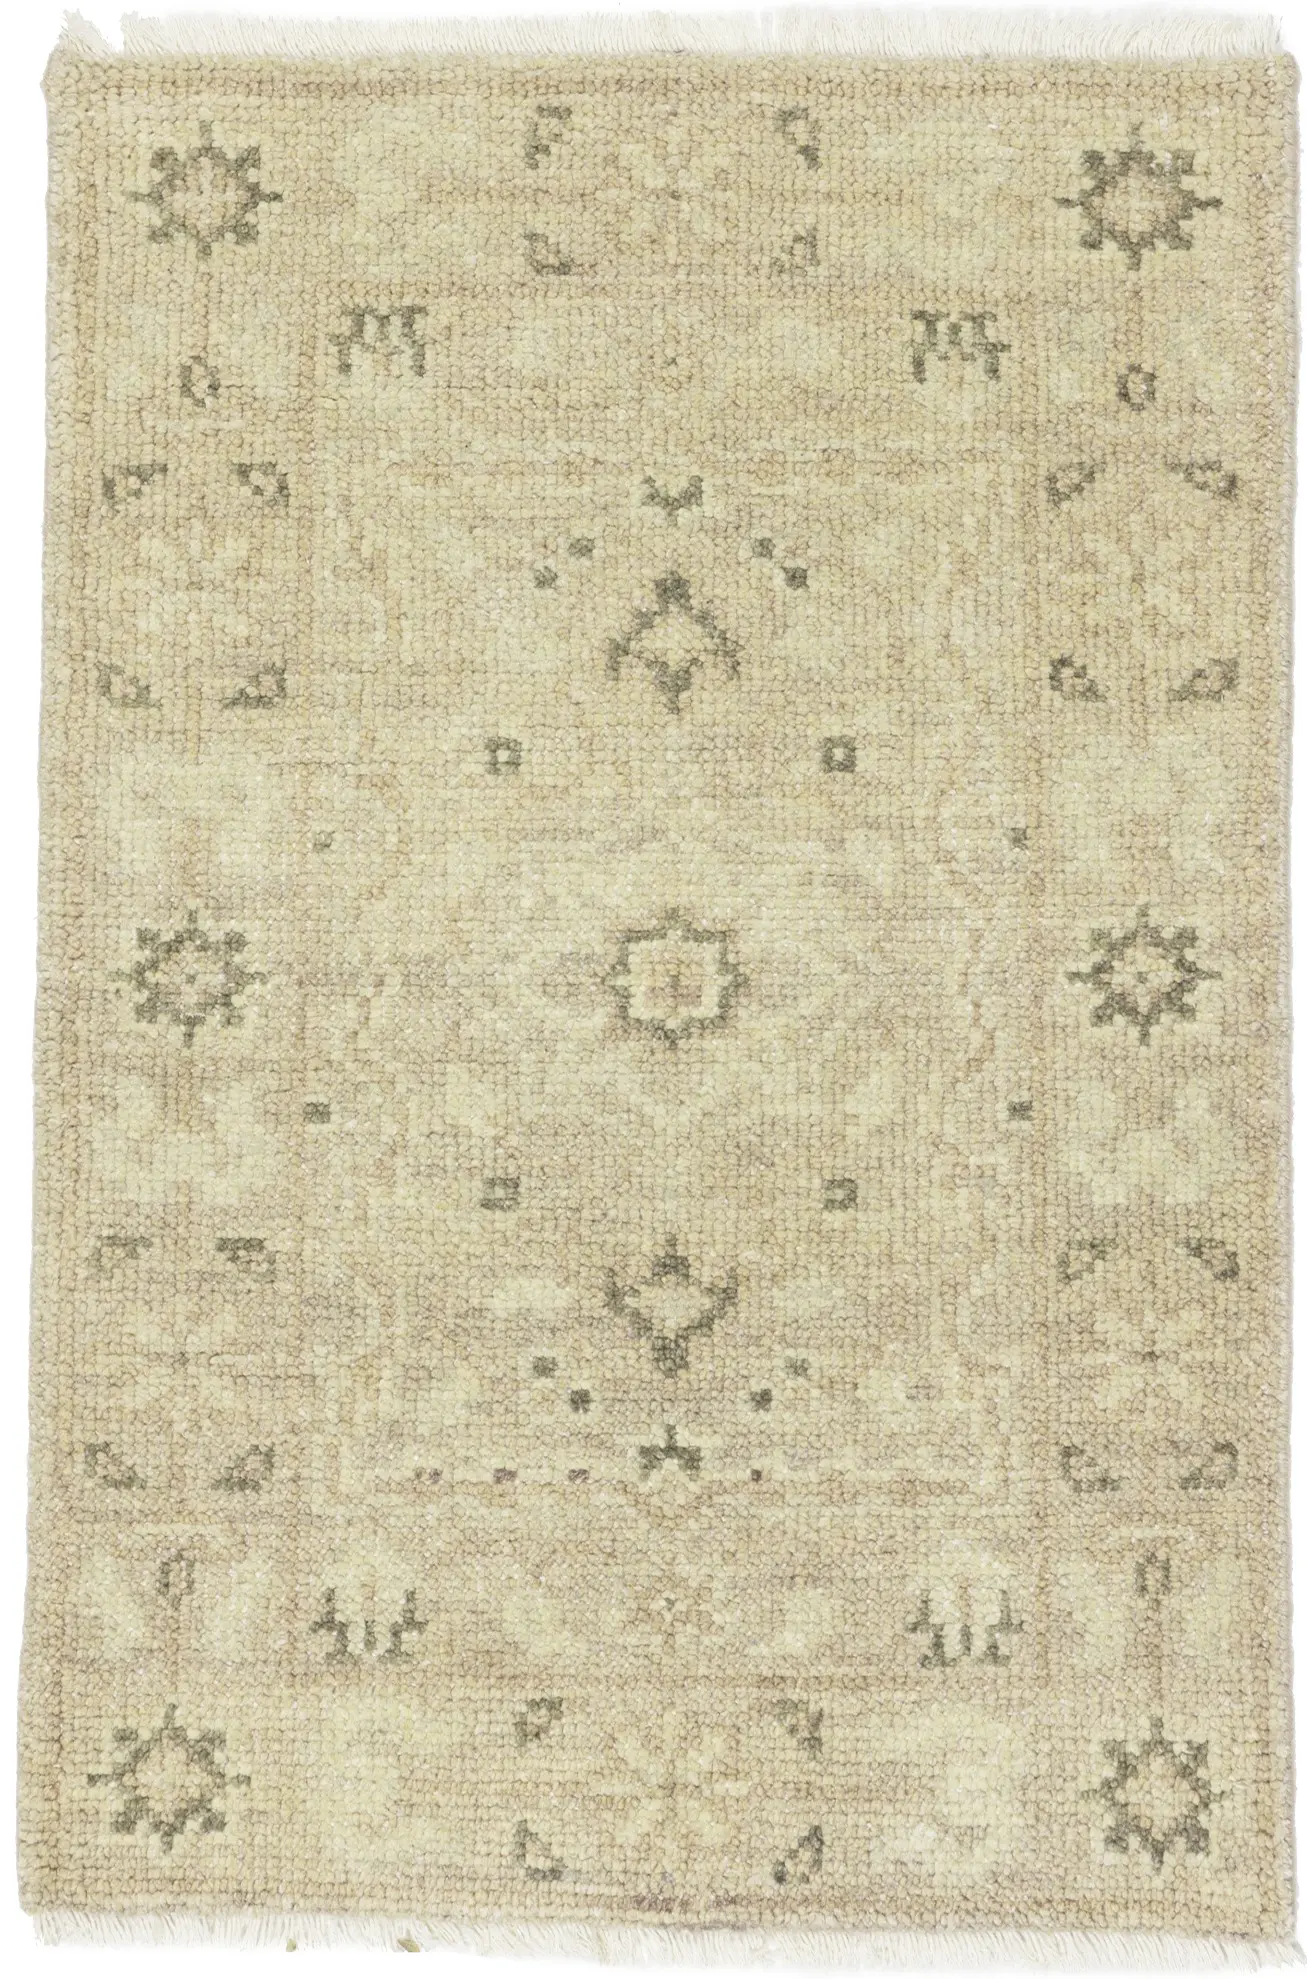 Muted Pinkish Beige Floral 2X3 Transitional Oriental Rug